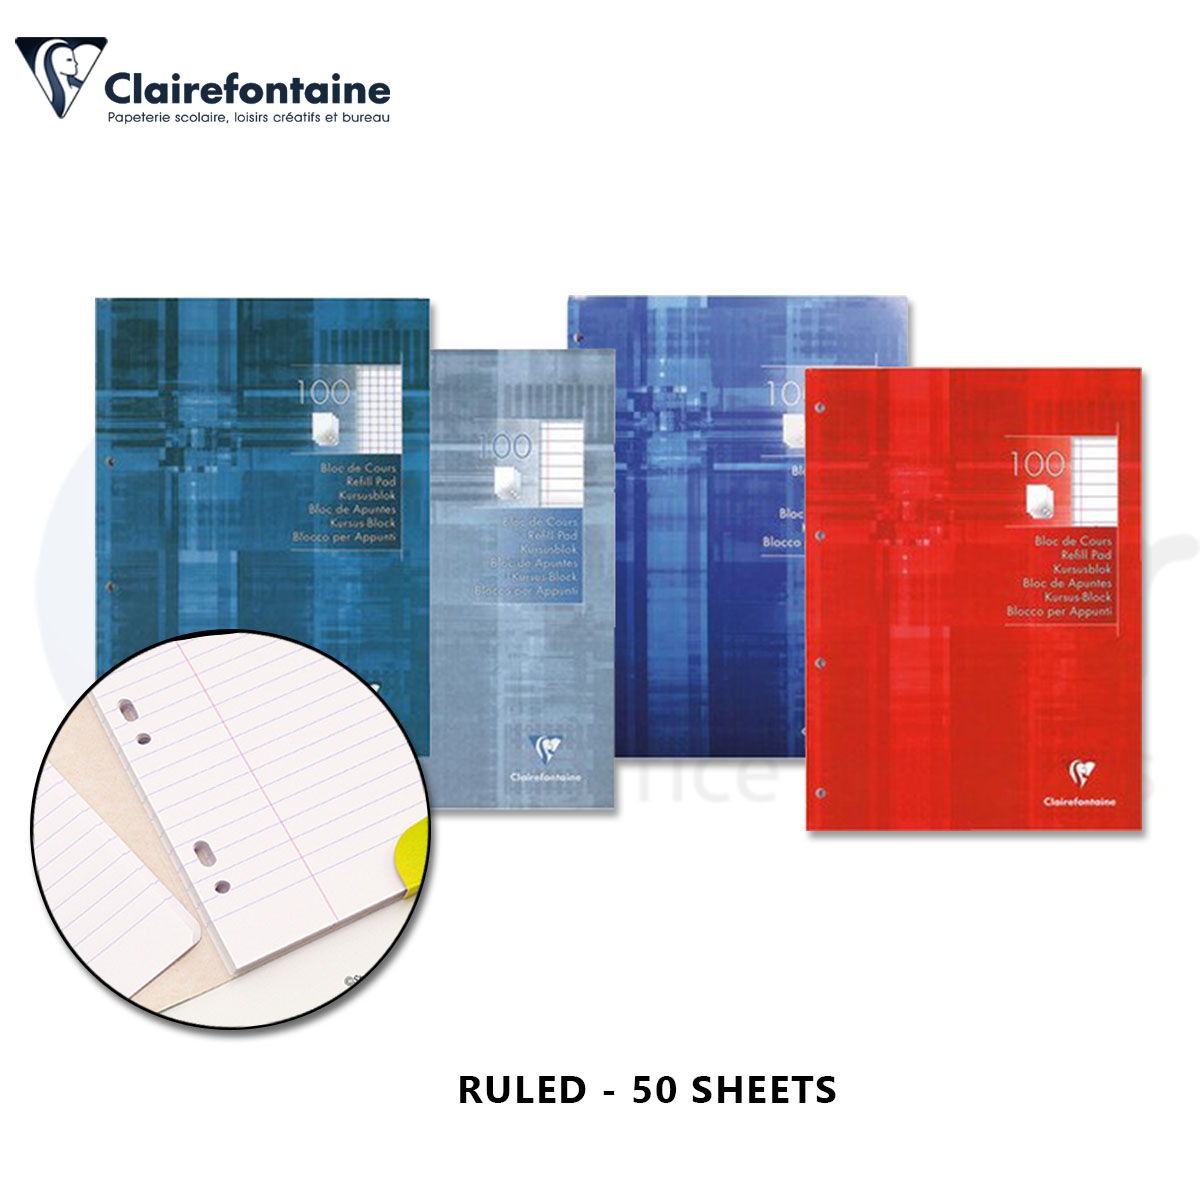 Clairefontaine,A4 refill paper,90gr ruled(50sht)